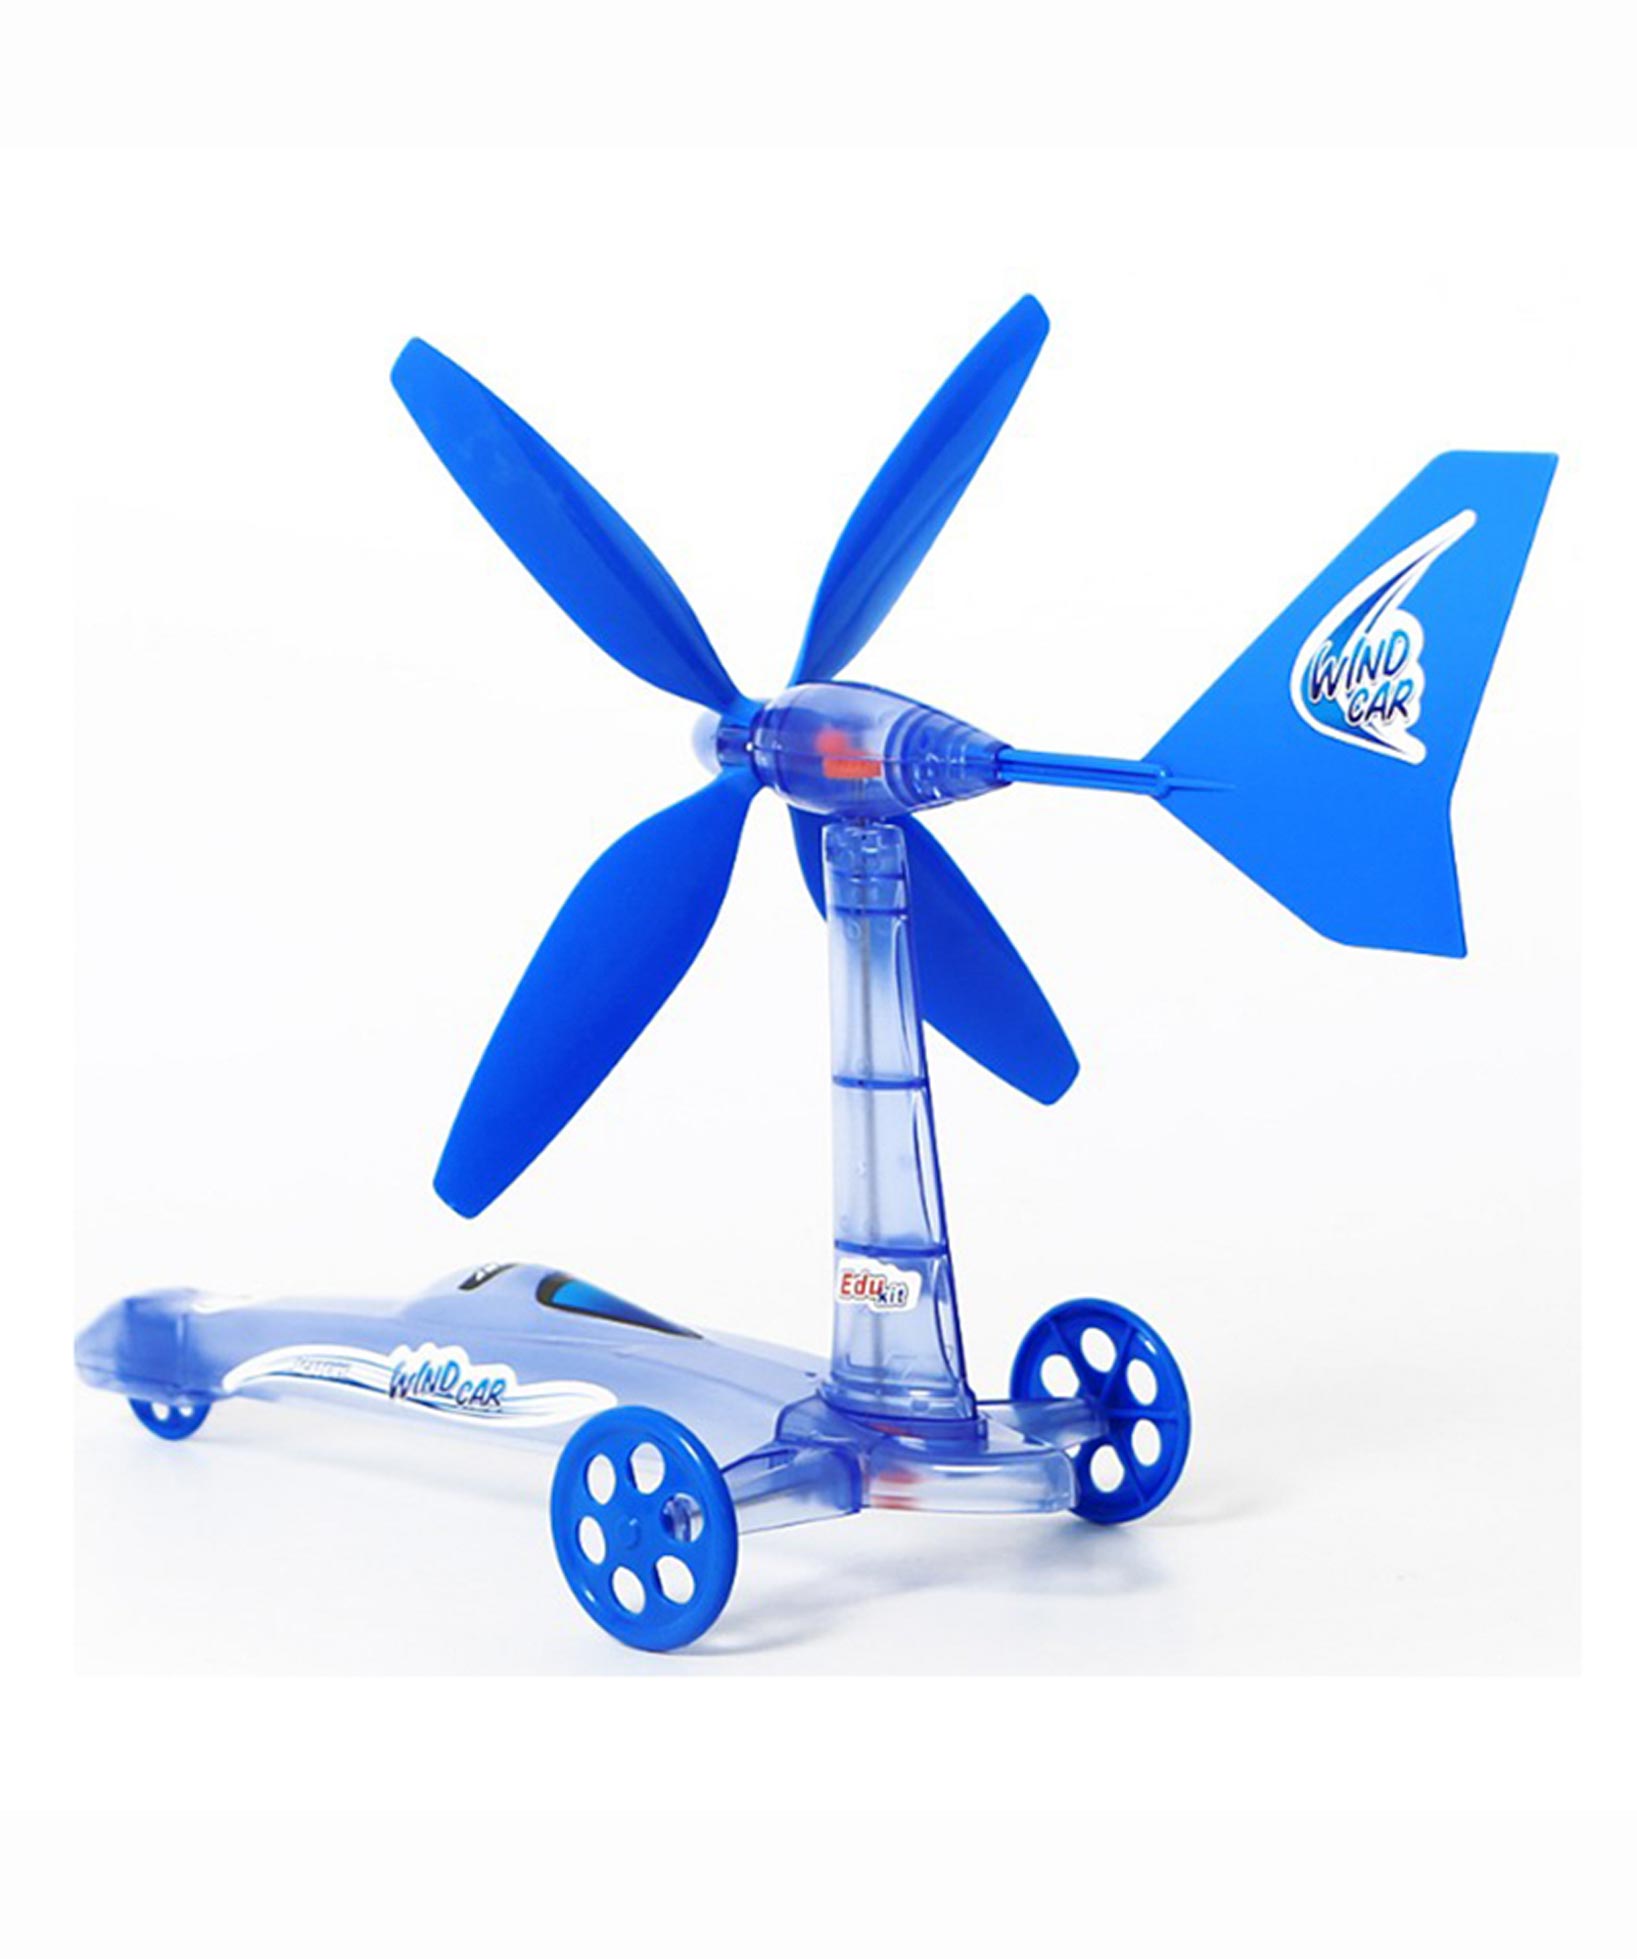 Working with wind energy ''Yoyo'' constructor